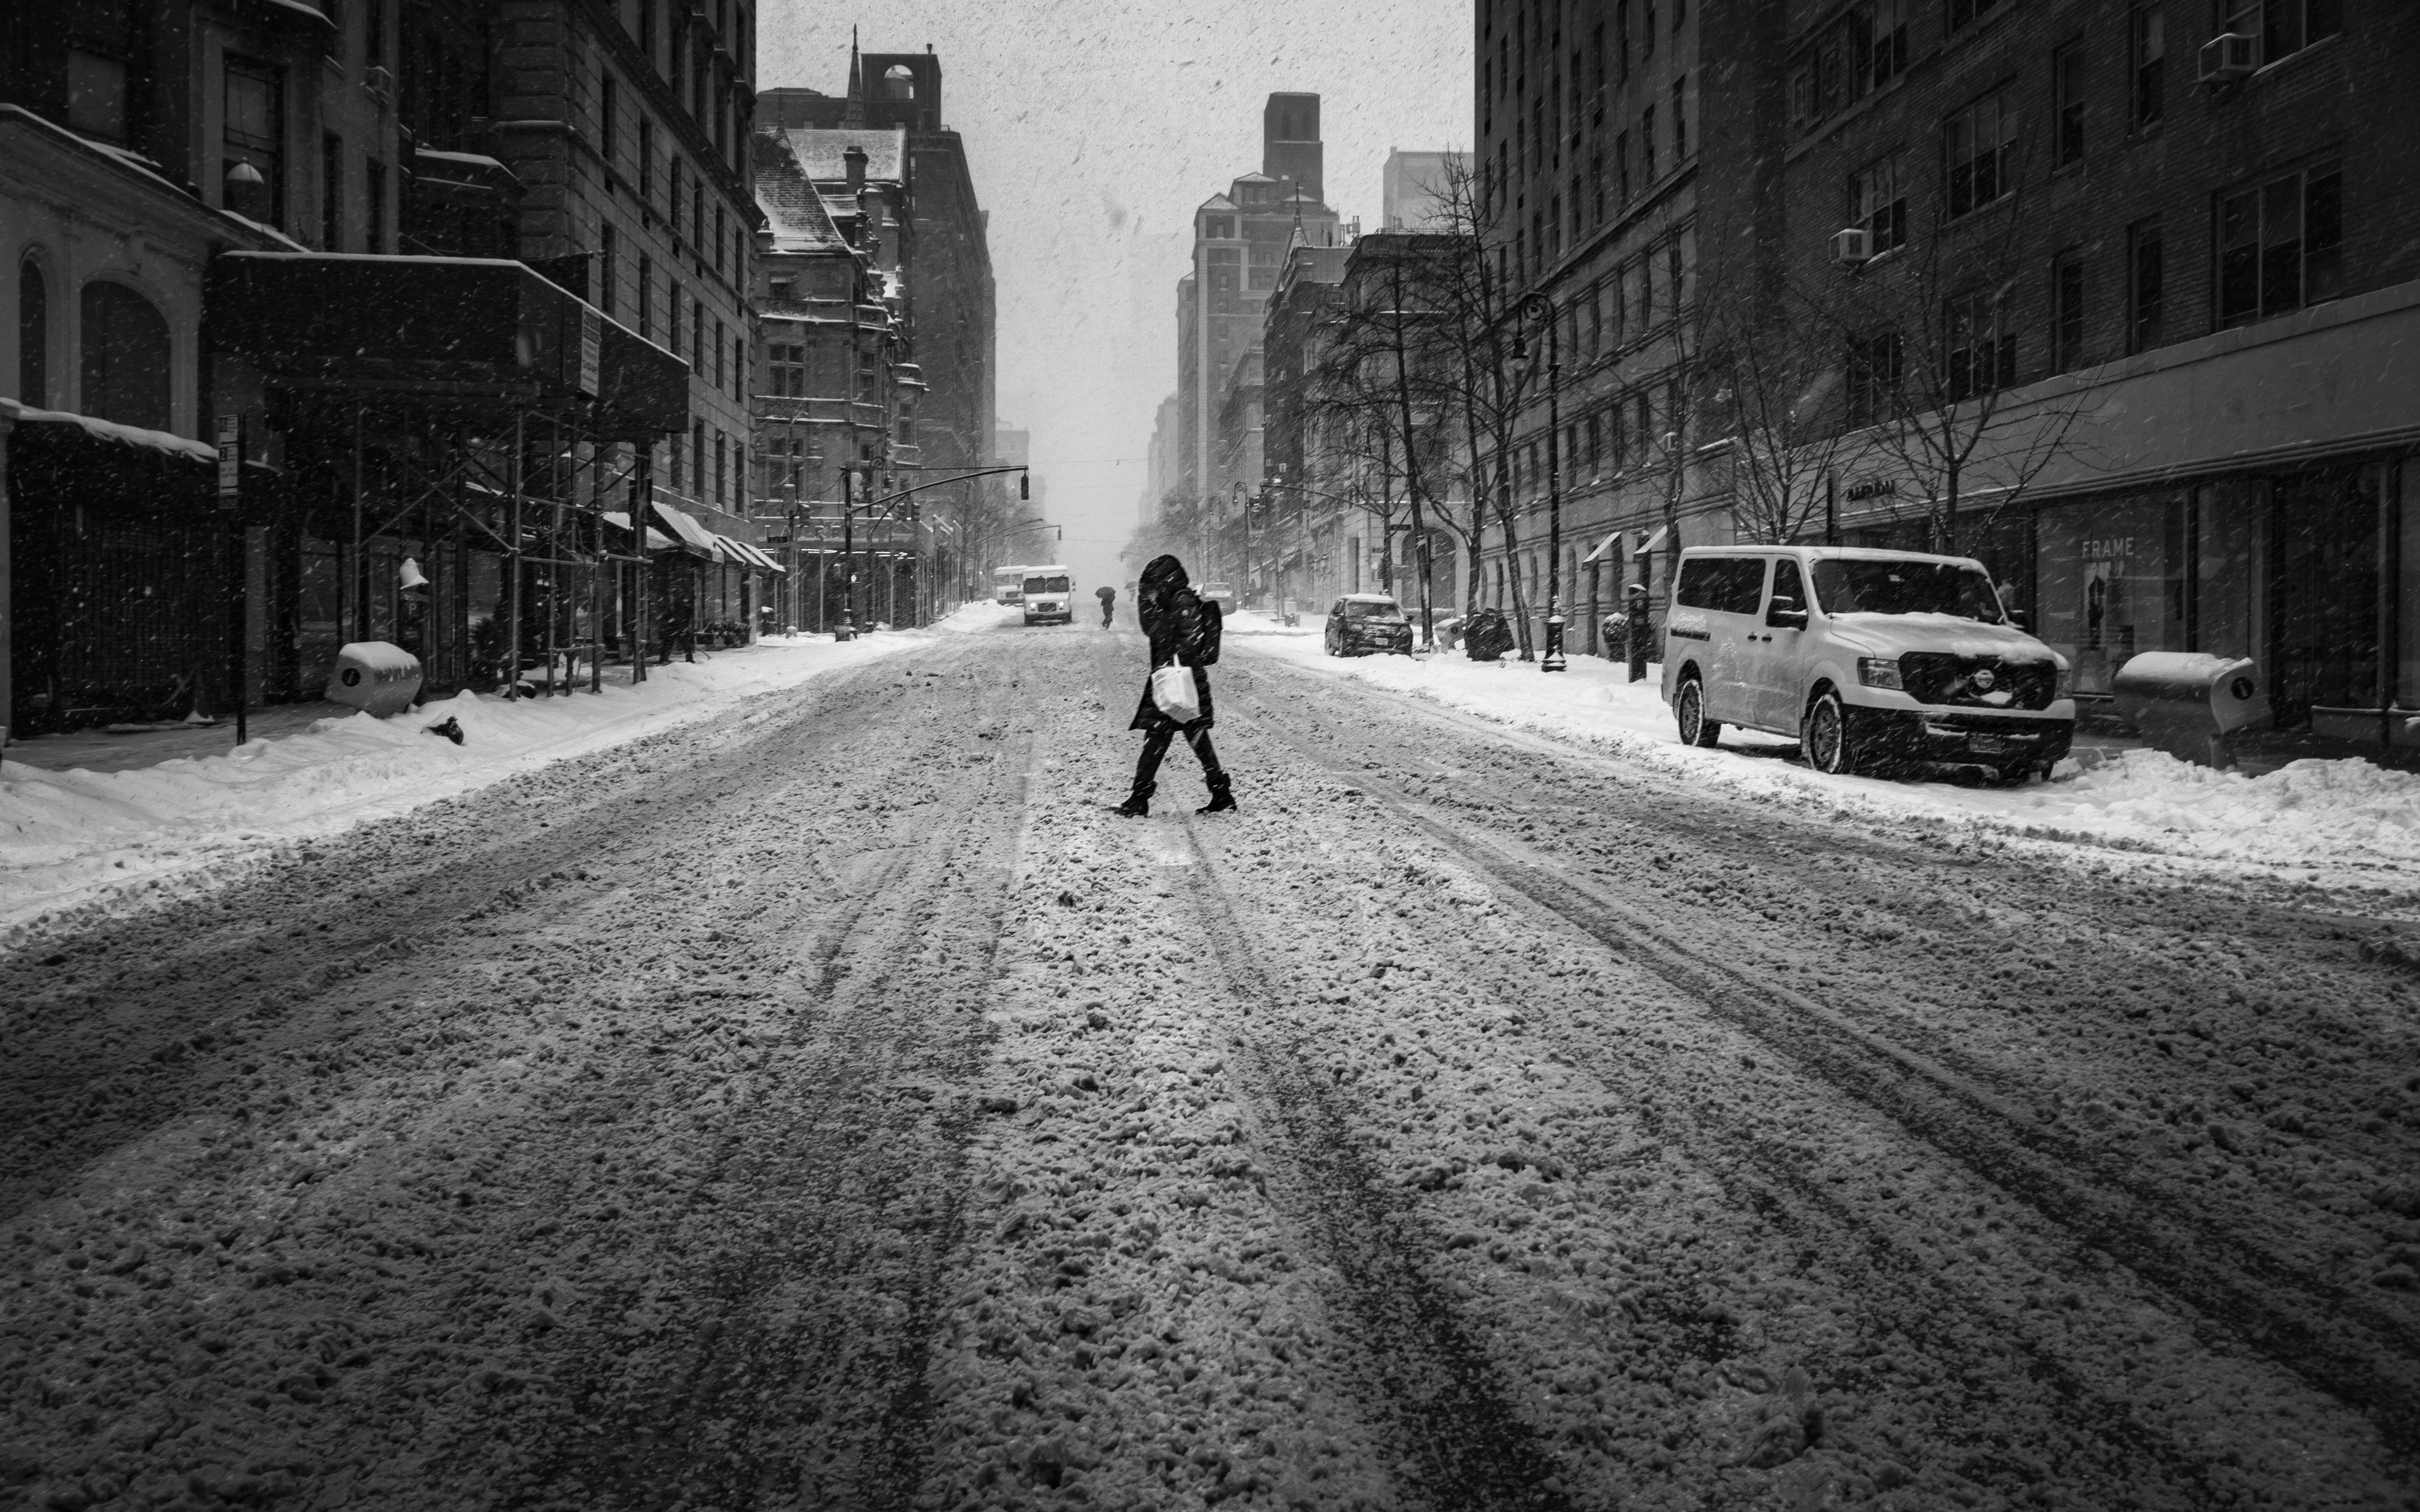 A person crosses the street during blizzard in Manhattan.